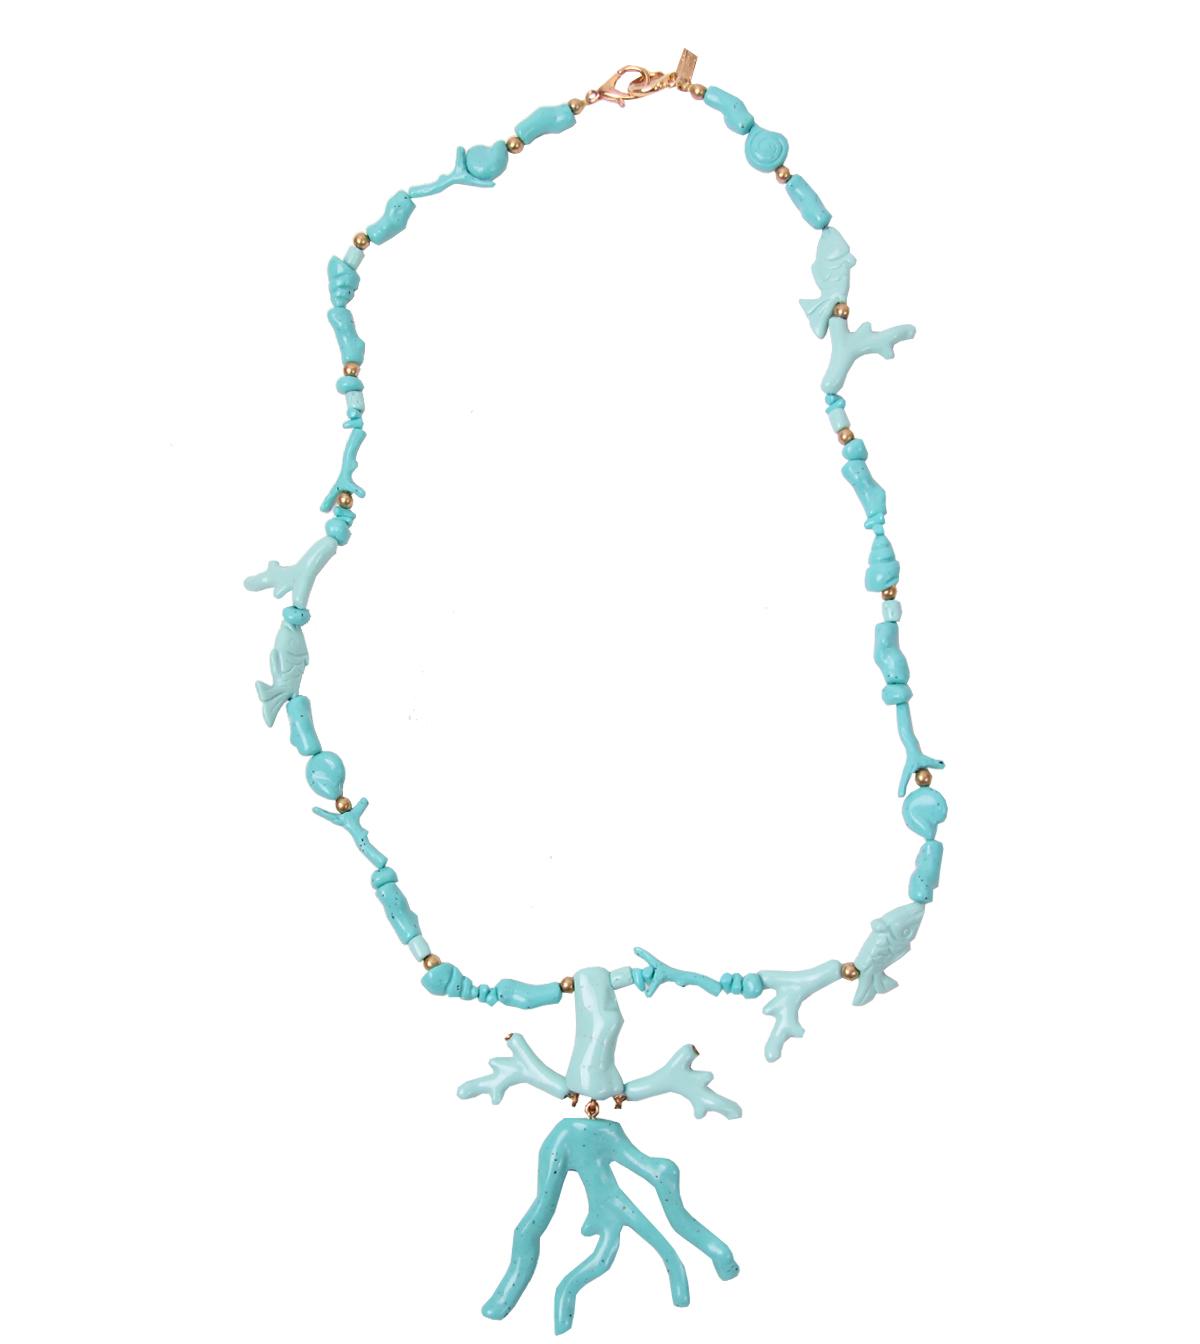 Foto Moschino Cheap & Chic Turquoise/Gold Sealife Necklace